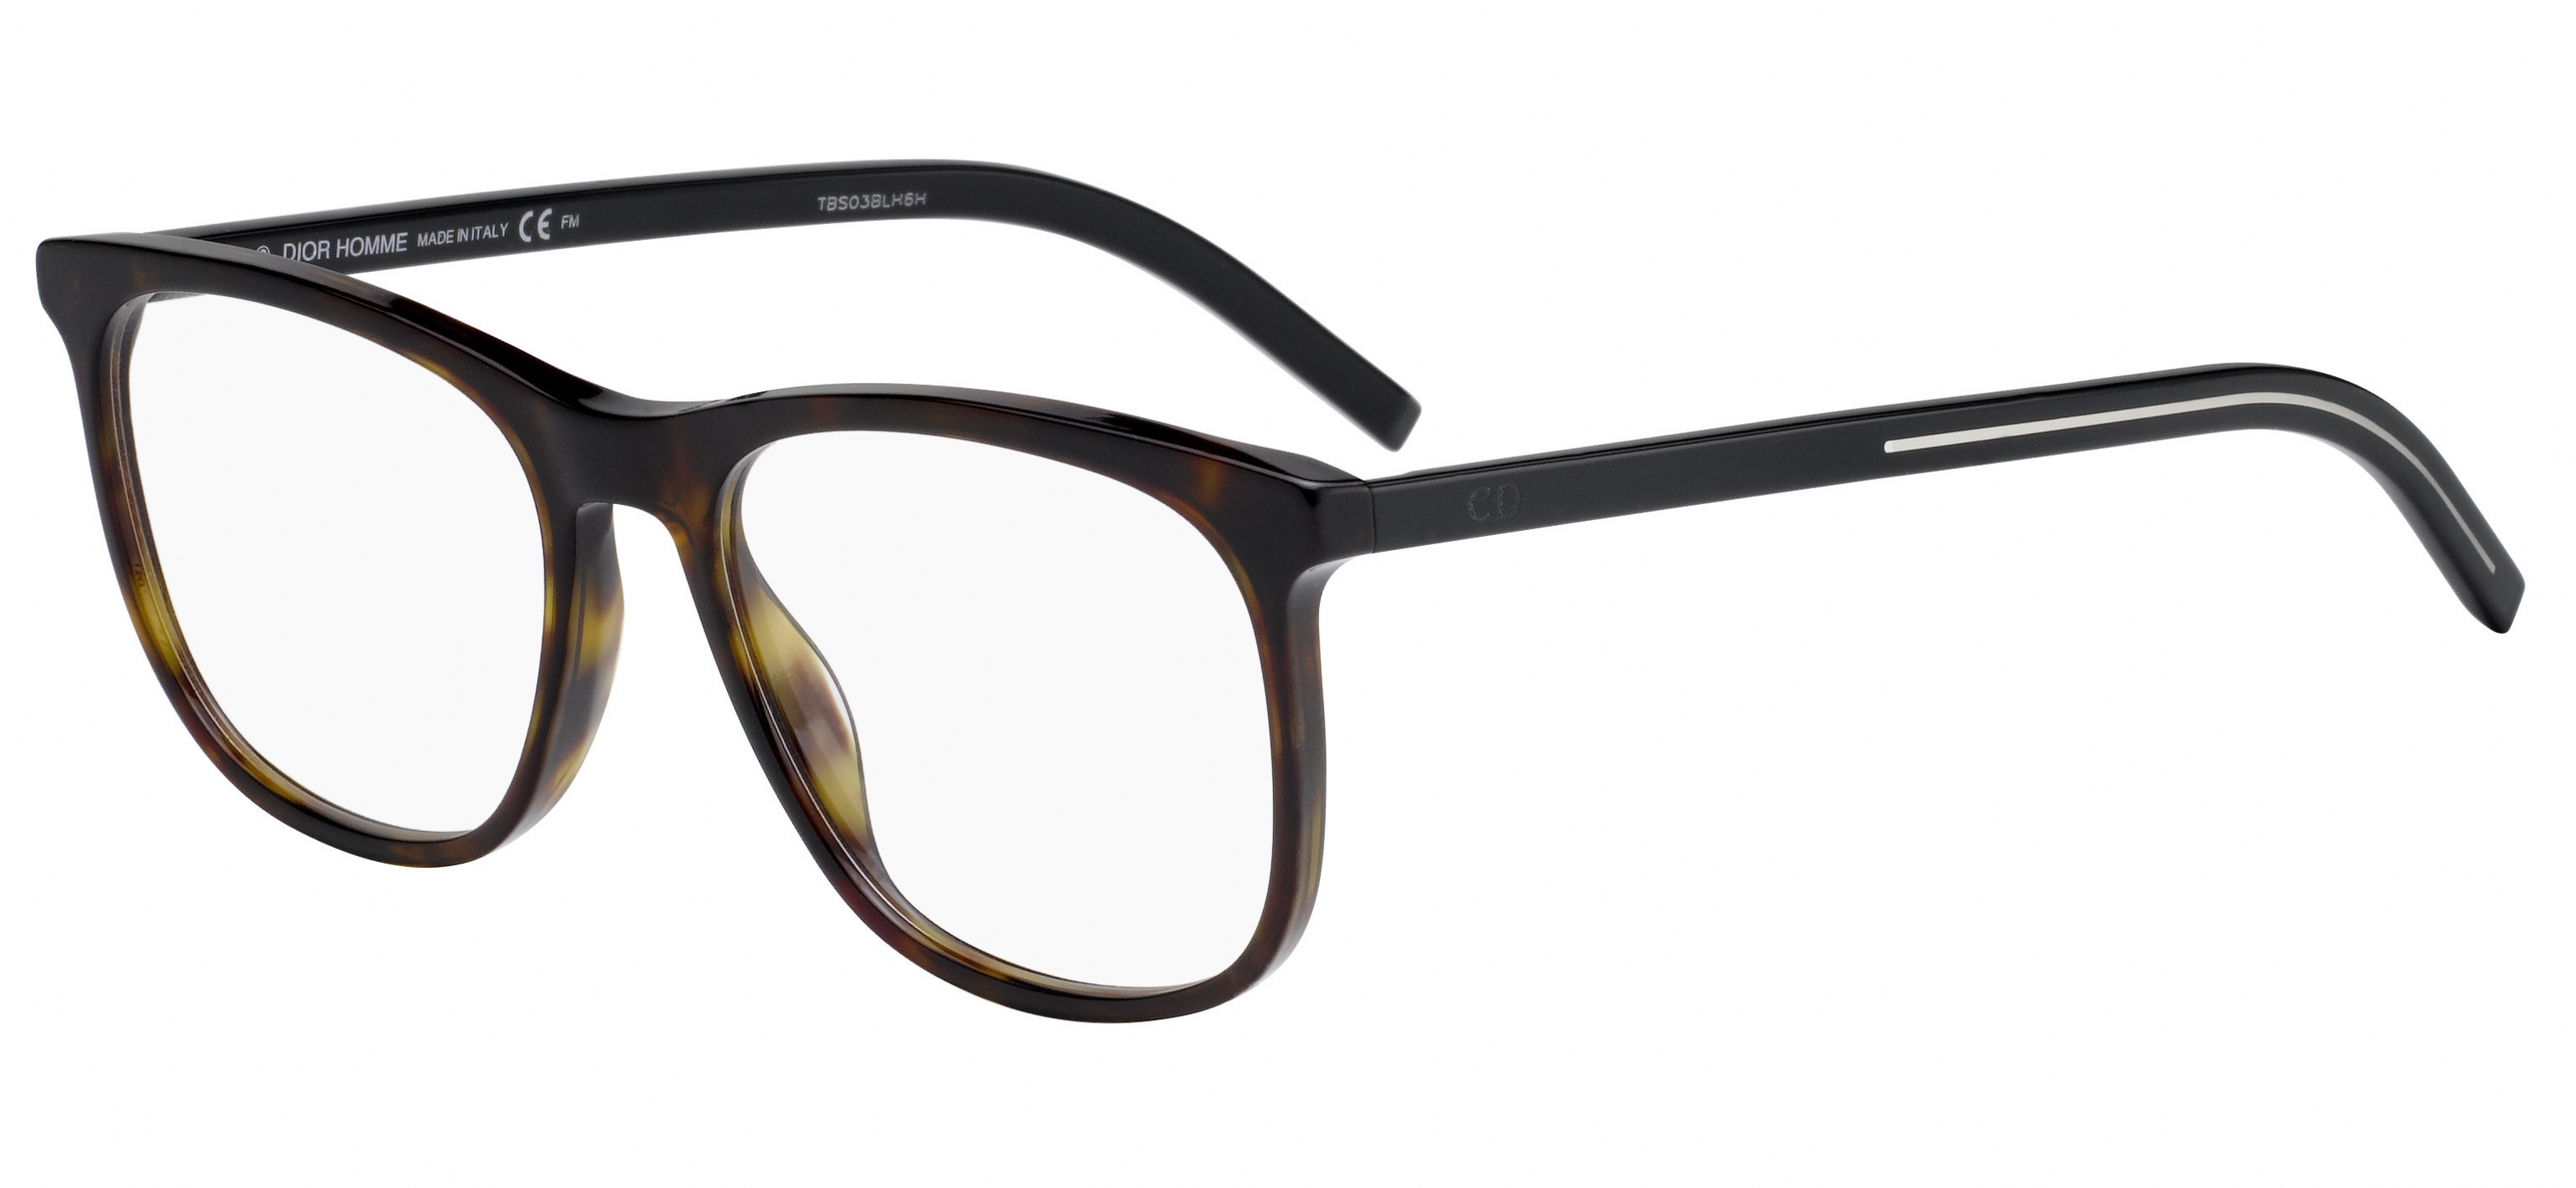 Buy Dior Homme Eyeglasses directly from OpticsFast.com